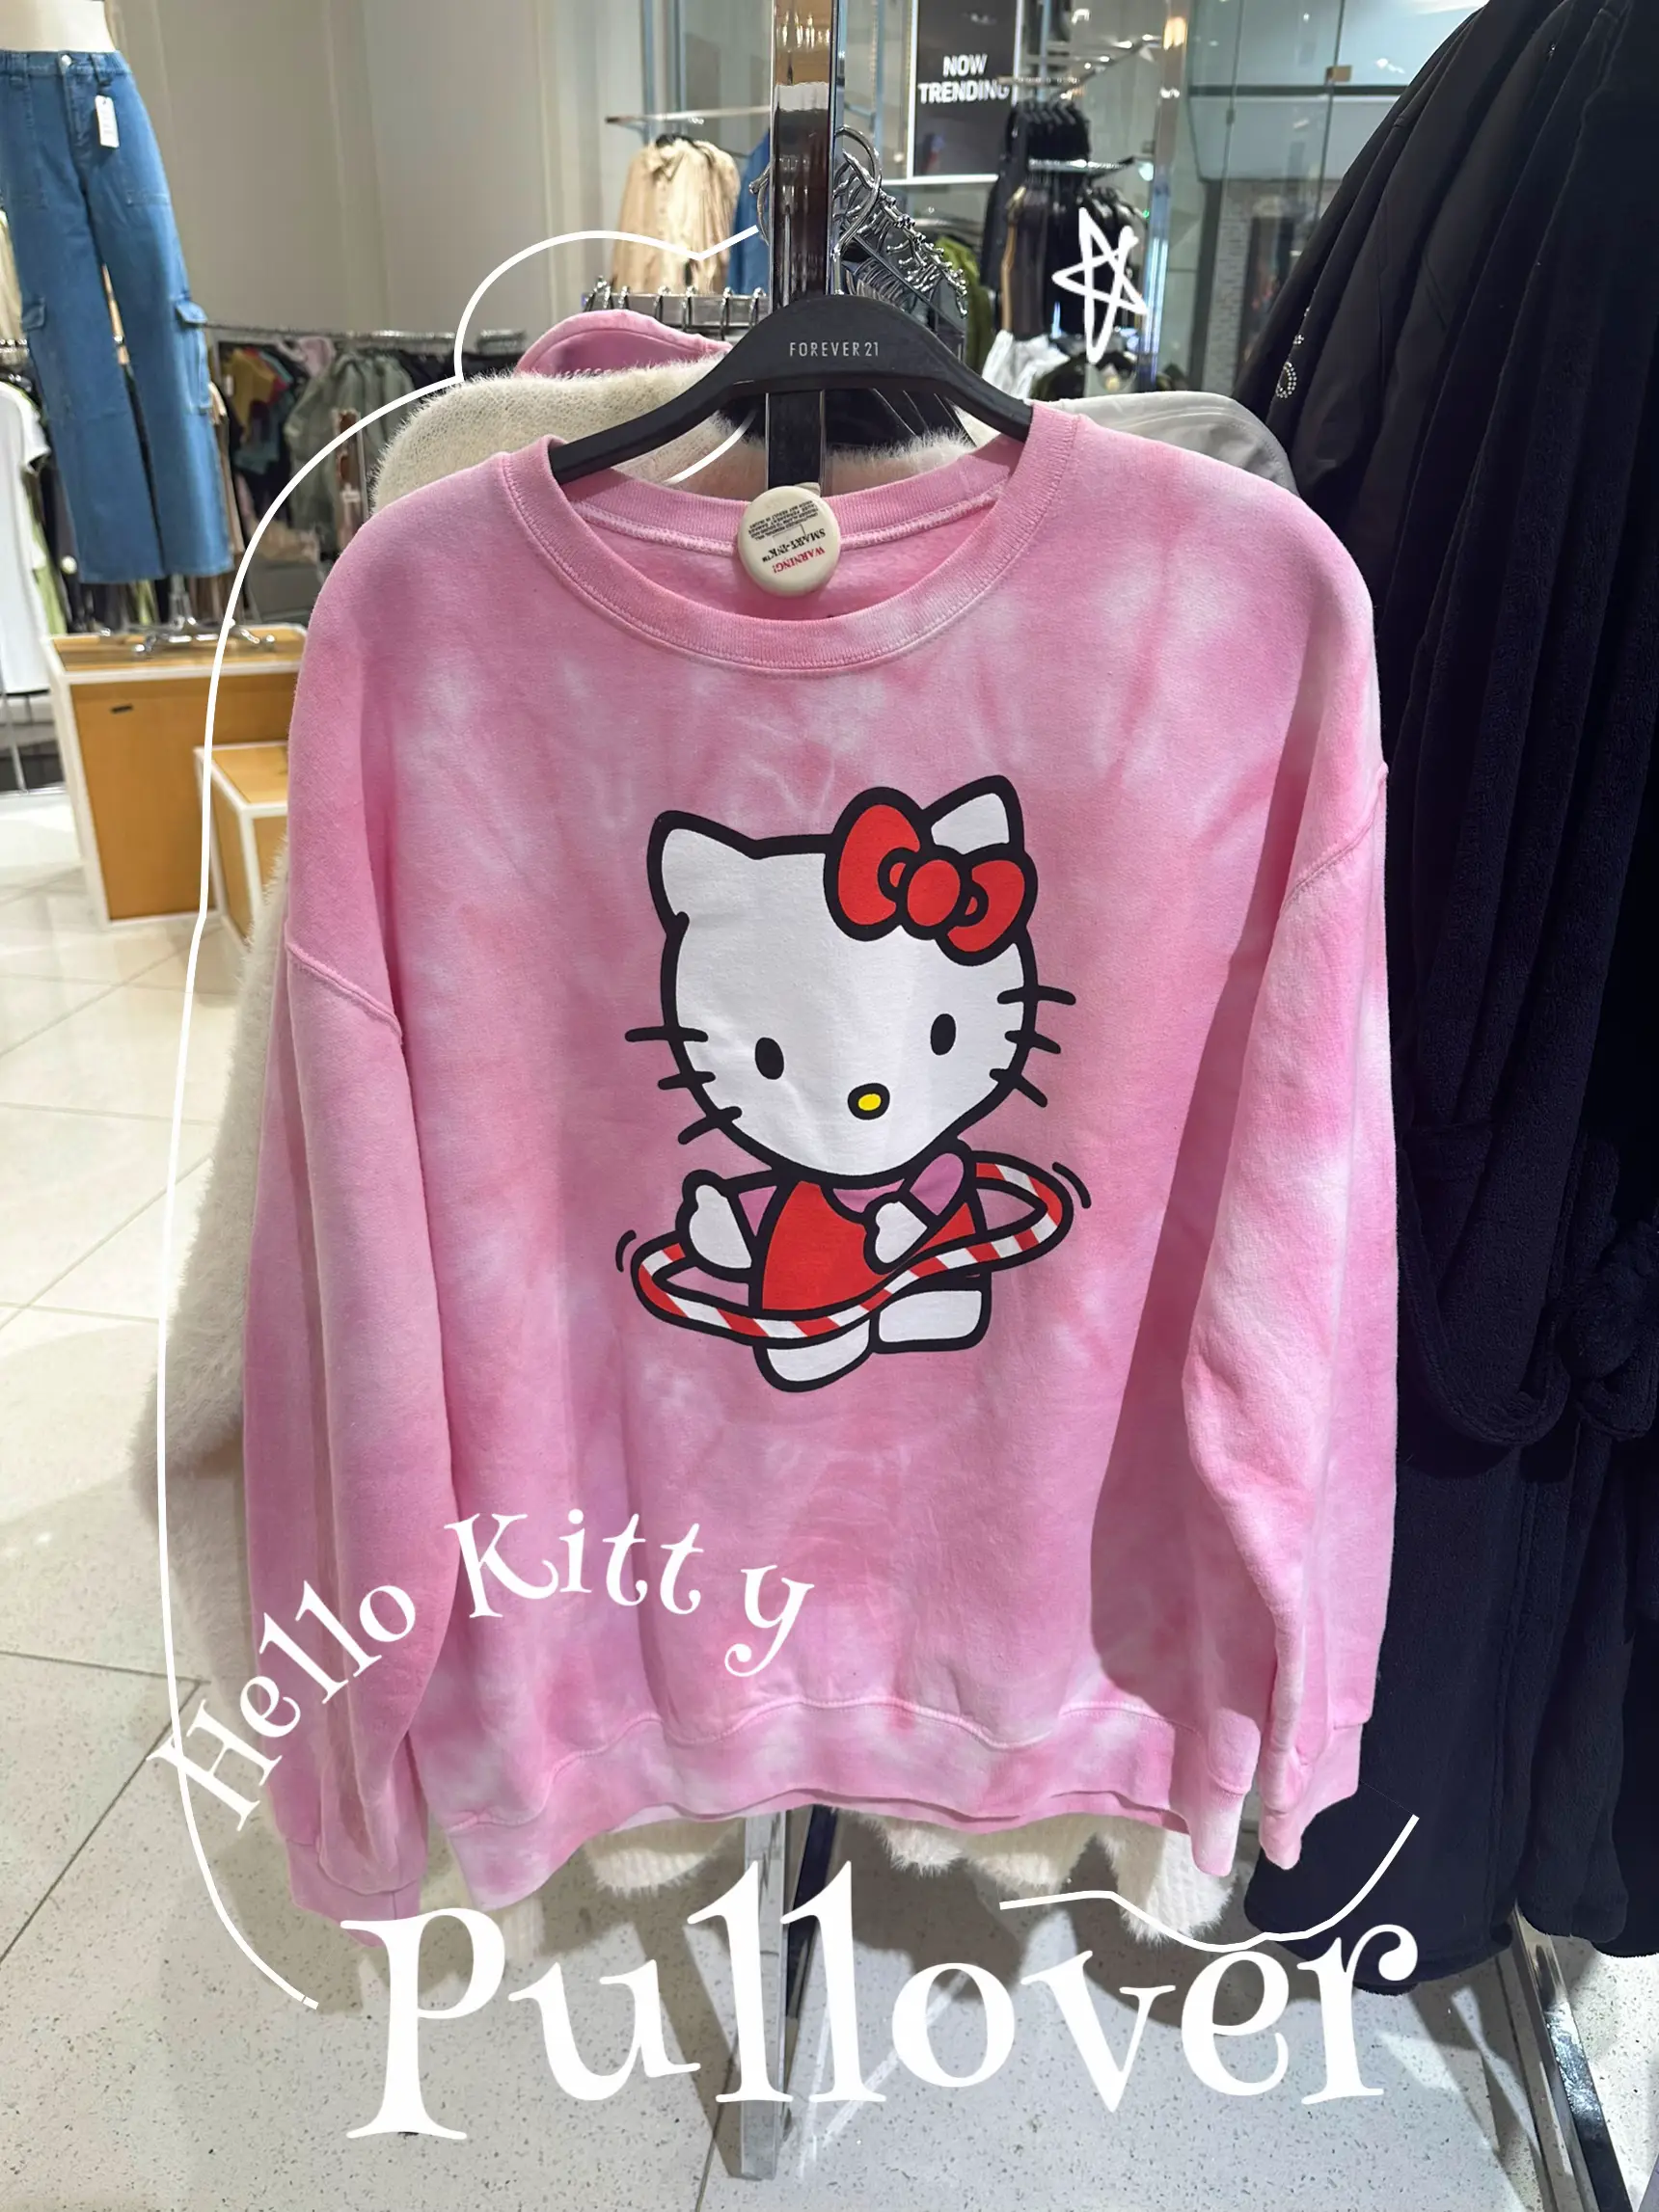 FOREVER 21 x Hello Kitty and Friends collection is out NOWWWWW. I